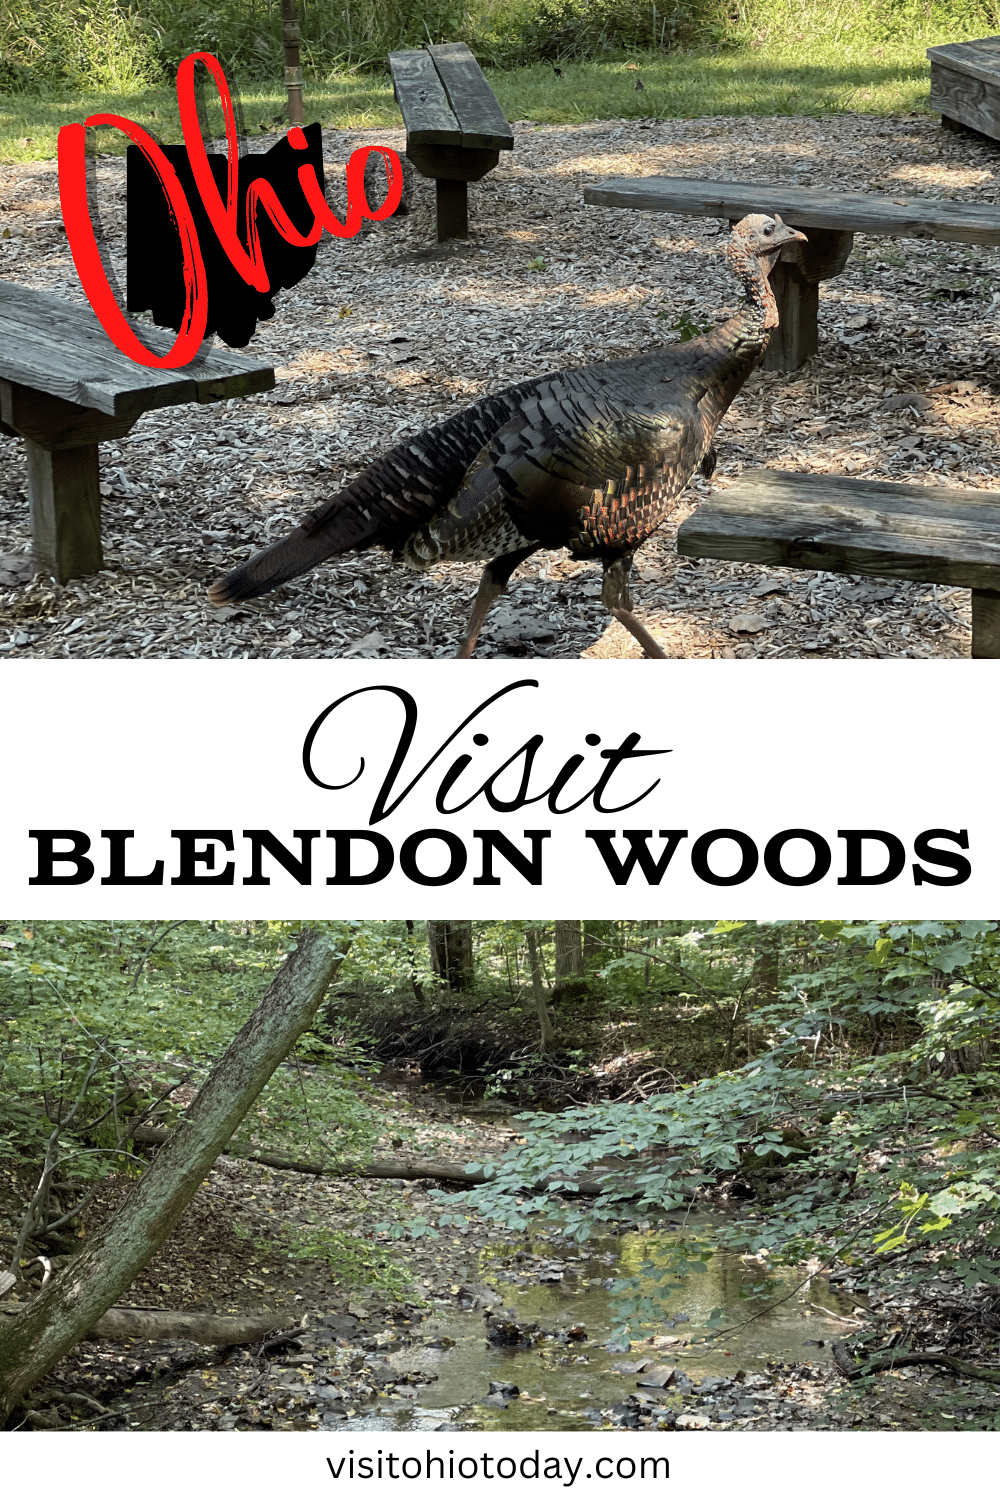 Blendon Woods covers an area of 653 acres, containing stream-cut ravines with exposed ripple rock sandstone, forests and wide varieties of songbirds, waterfowl and other wildlife. Located in Columbus, Blendon Woods is a pleasant haven from the hustle and bustle of daily life!